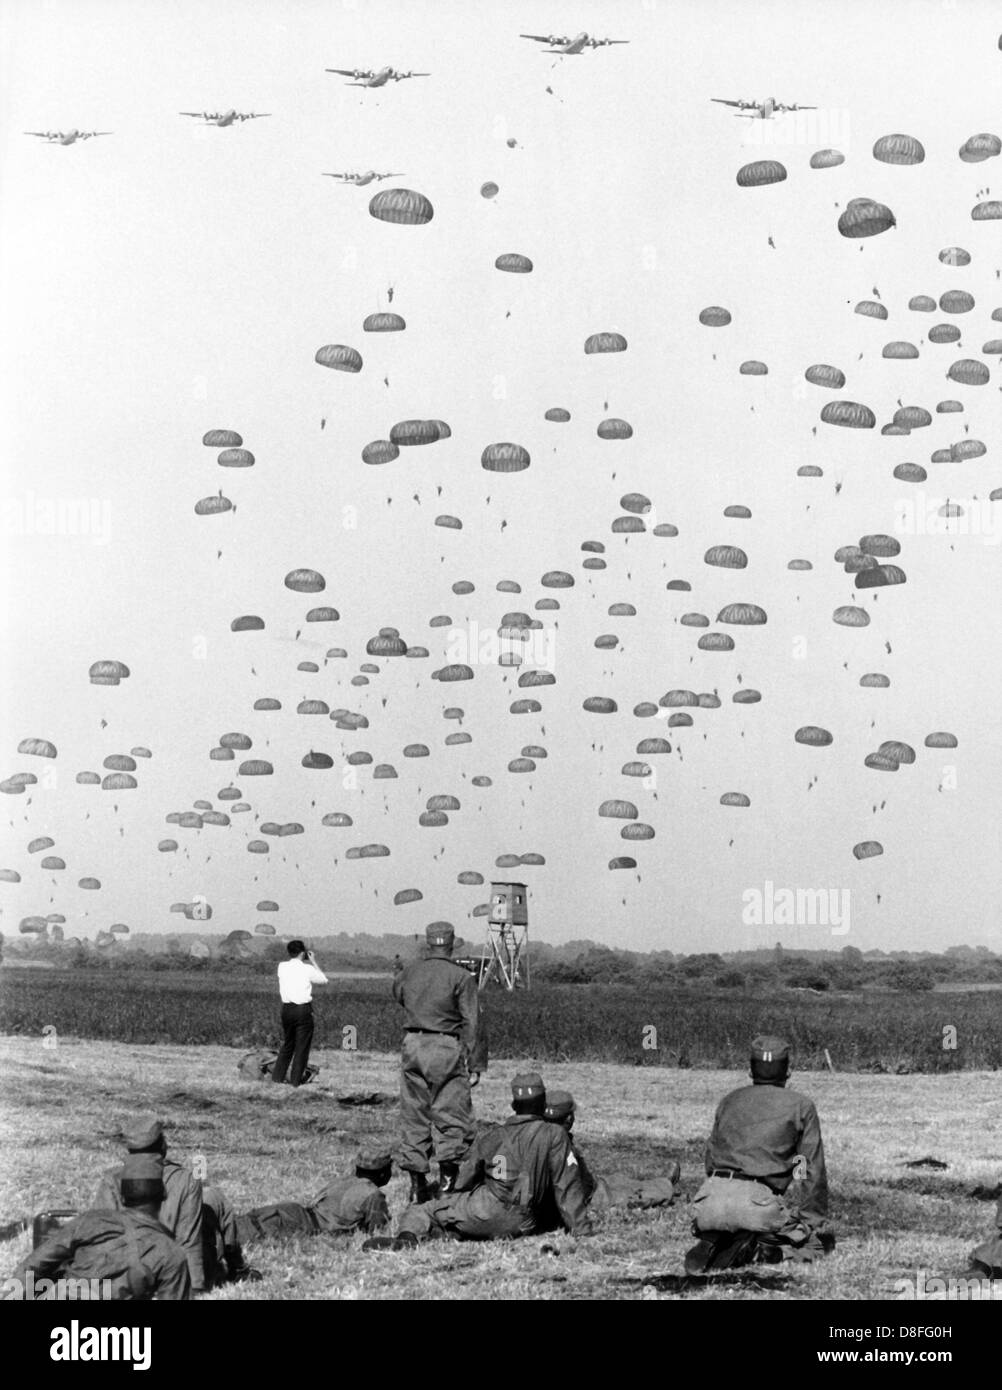 The soldiers of the 8th US infantry division levitate onto the ground like a swarm of bees on the 10th of June in 1964 near Günzburg in Bavaria. More than 2,000 paratroopers jumped off from 48 four-engined machines of the type C-130 'Hercules' above the operational area within the manoeuvre 'Northwind'. Stock Photo